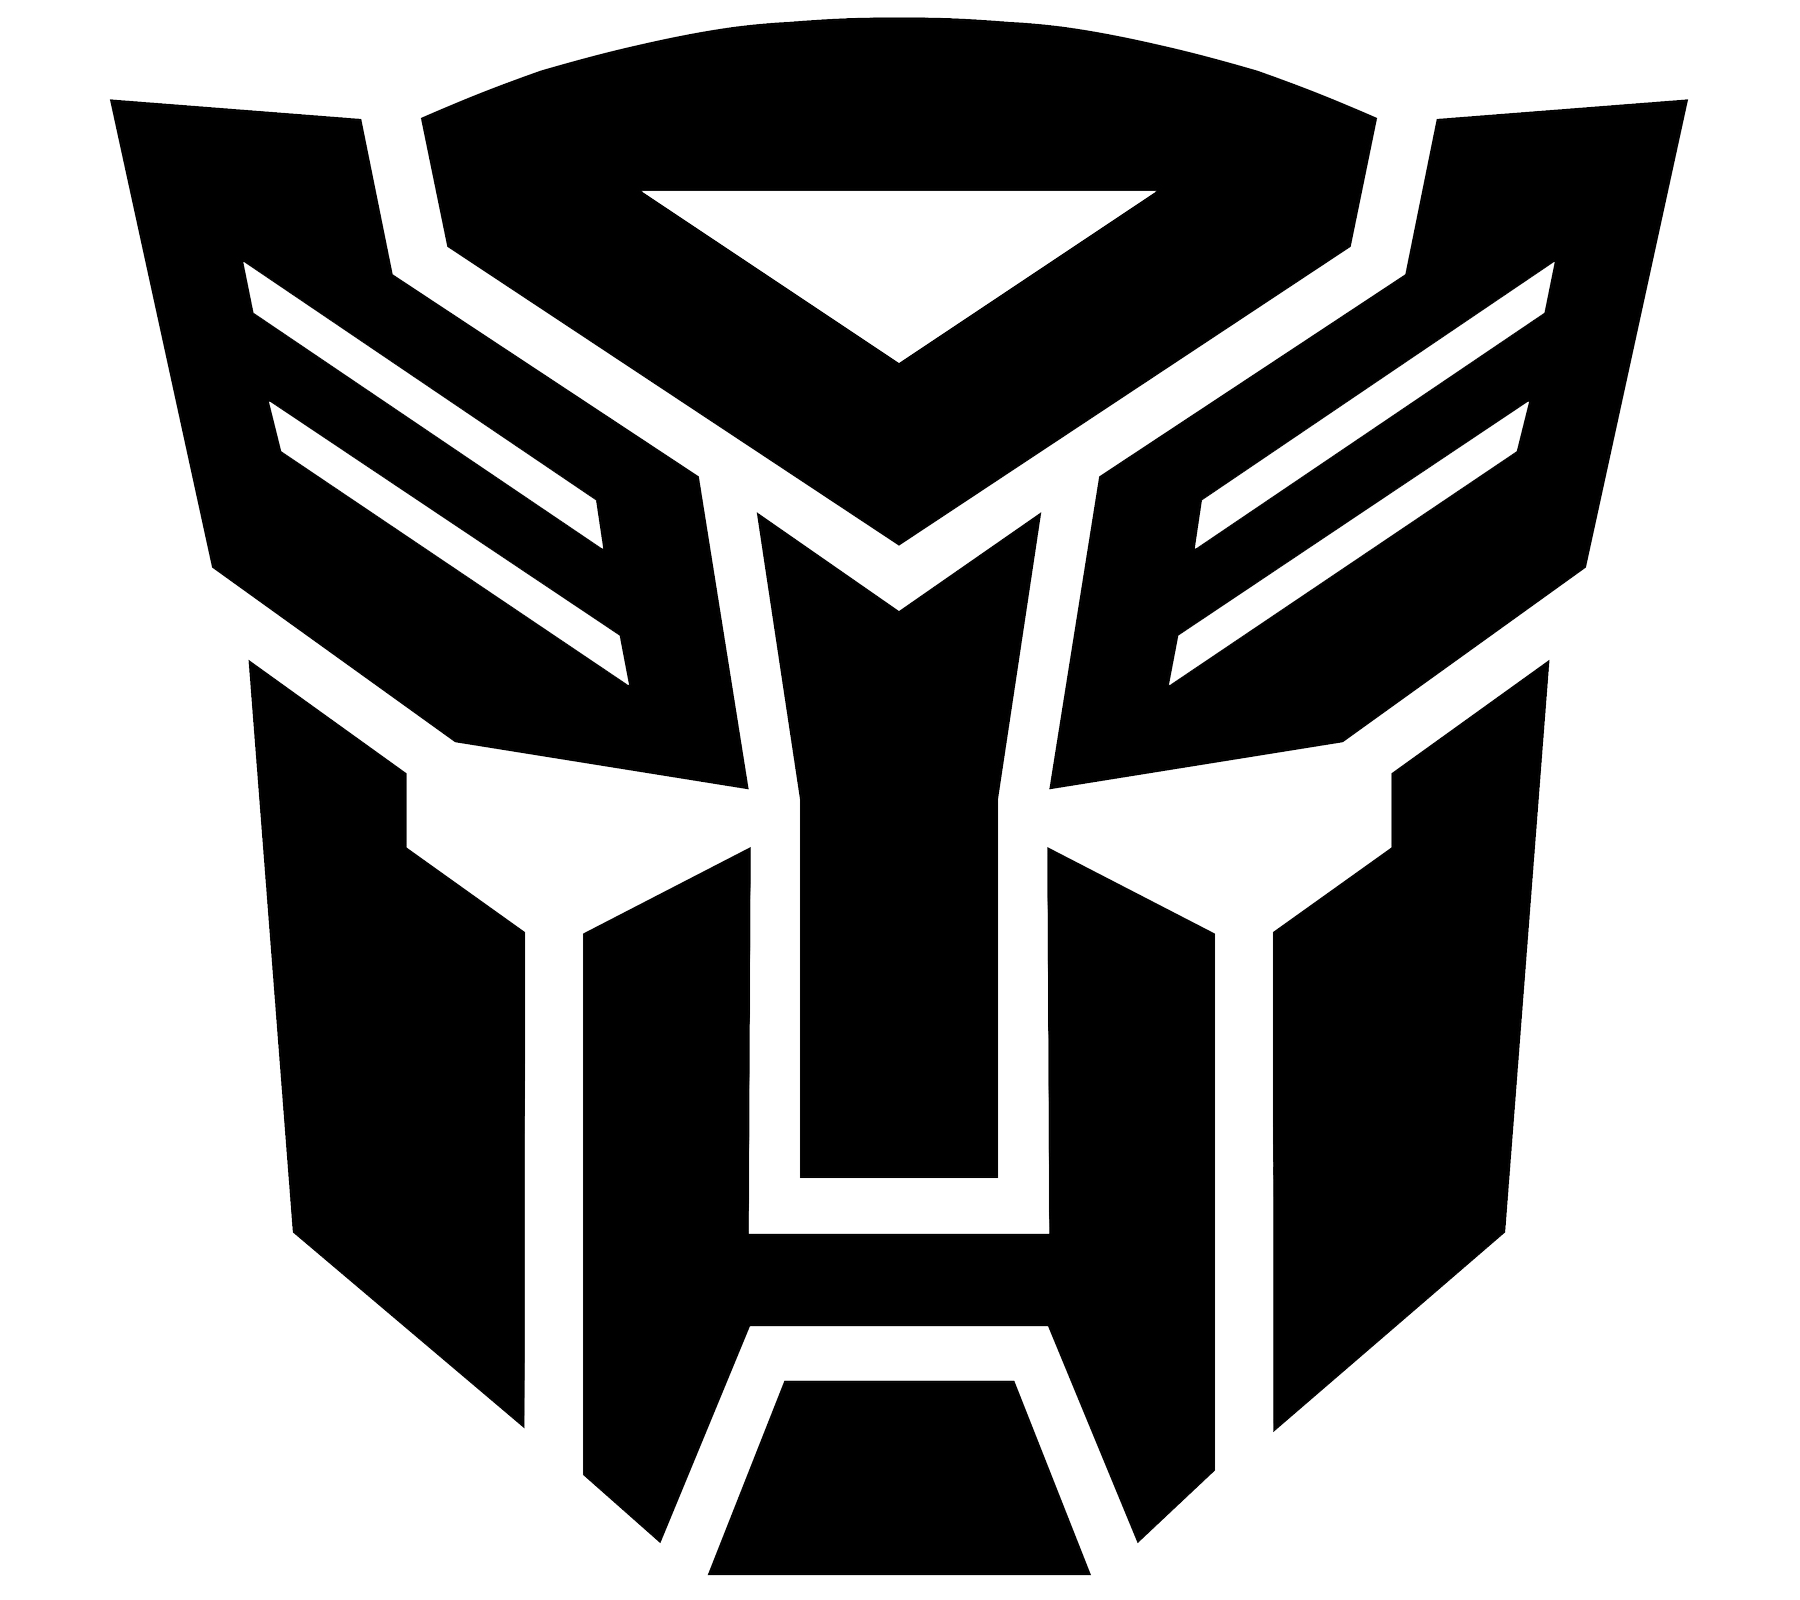 Transformers Logo - Transformers Logo, symbol meaning, History and Evolution